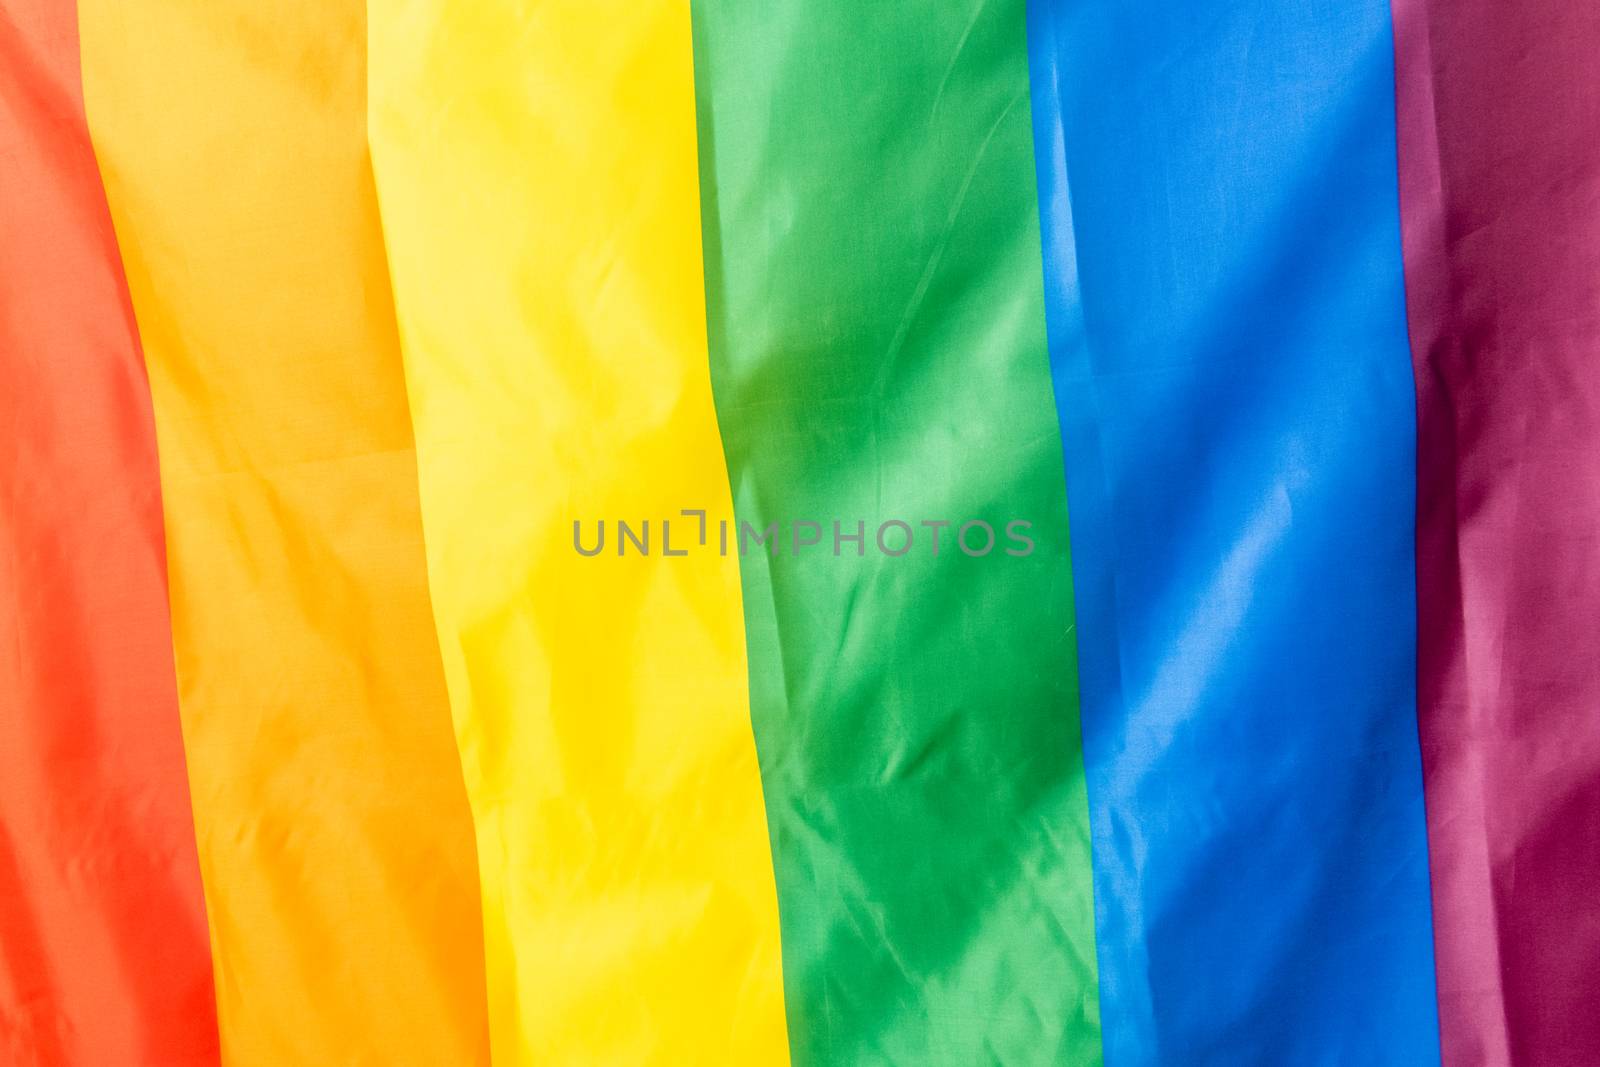 The Rainbow Flag, used as a symbol of lesbian, gay, bisexual, transgender, and queer (LGBTQ) pride and LGBTQ social movements.